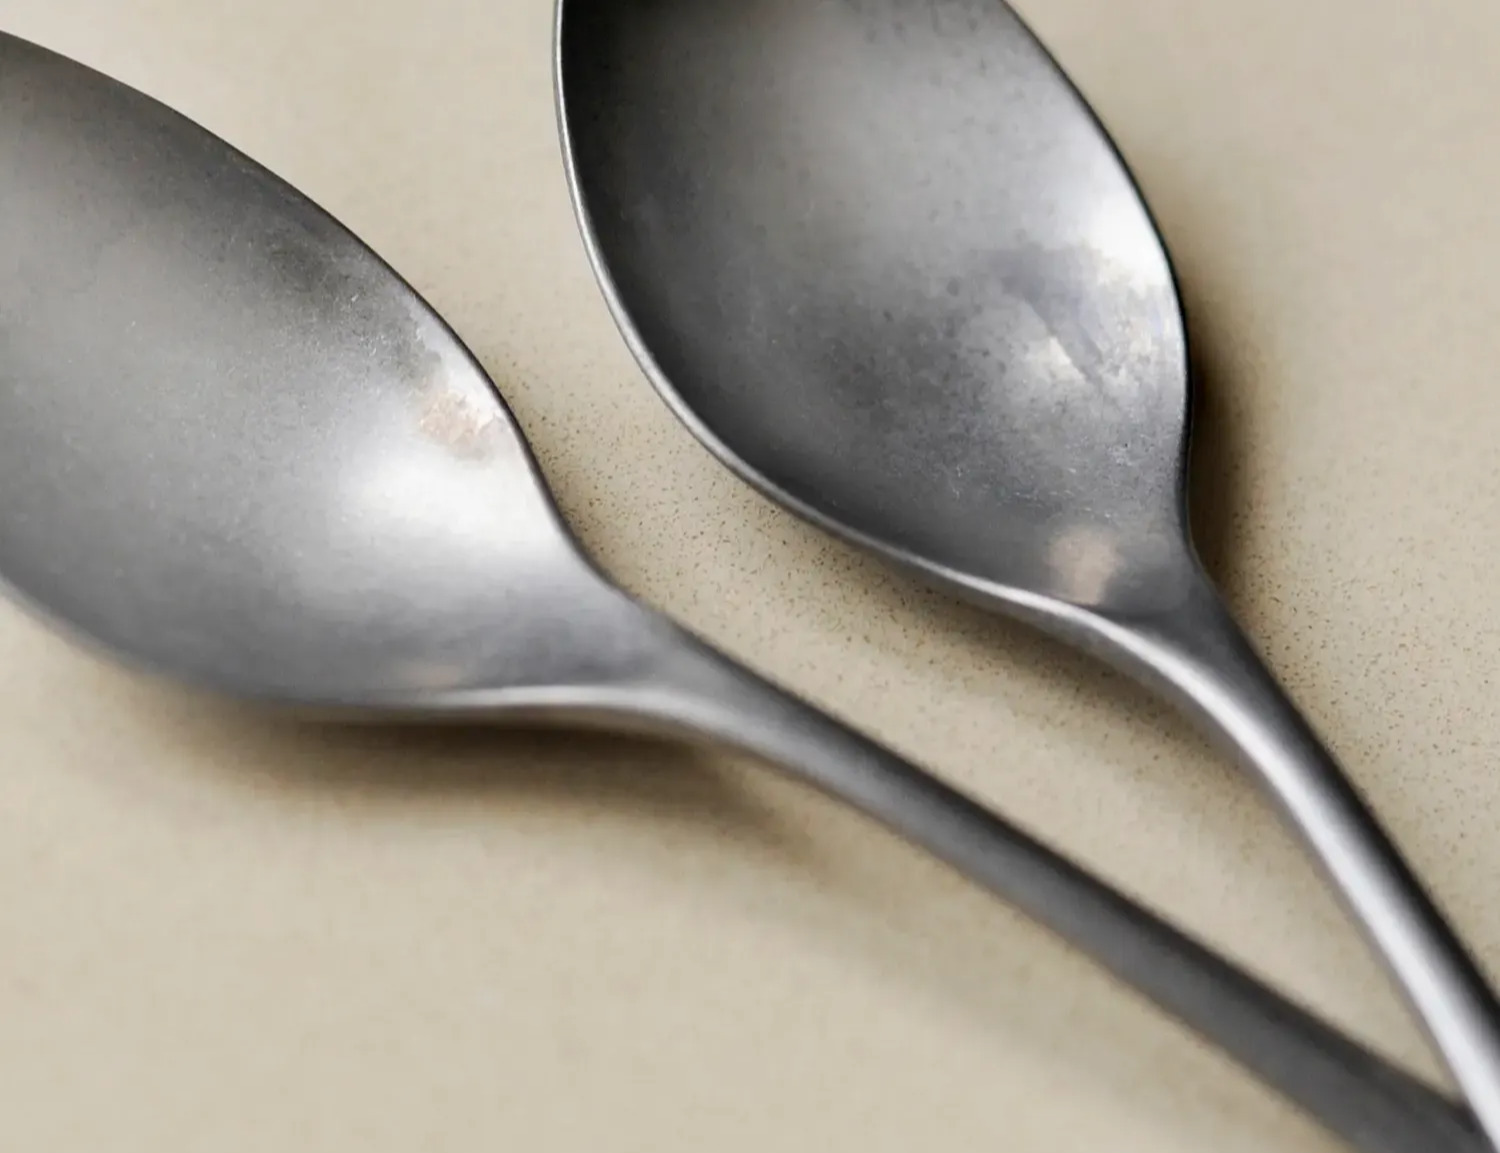 How to care for your cutlery